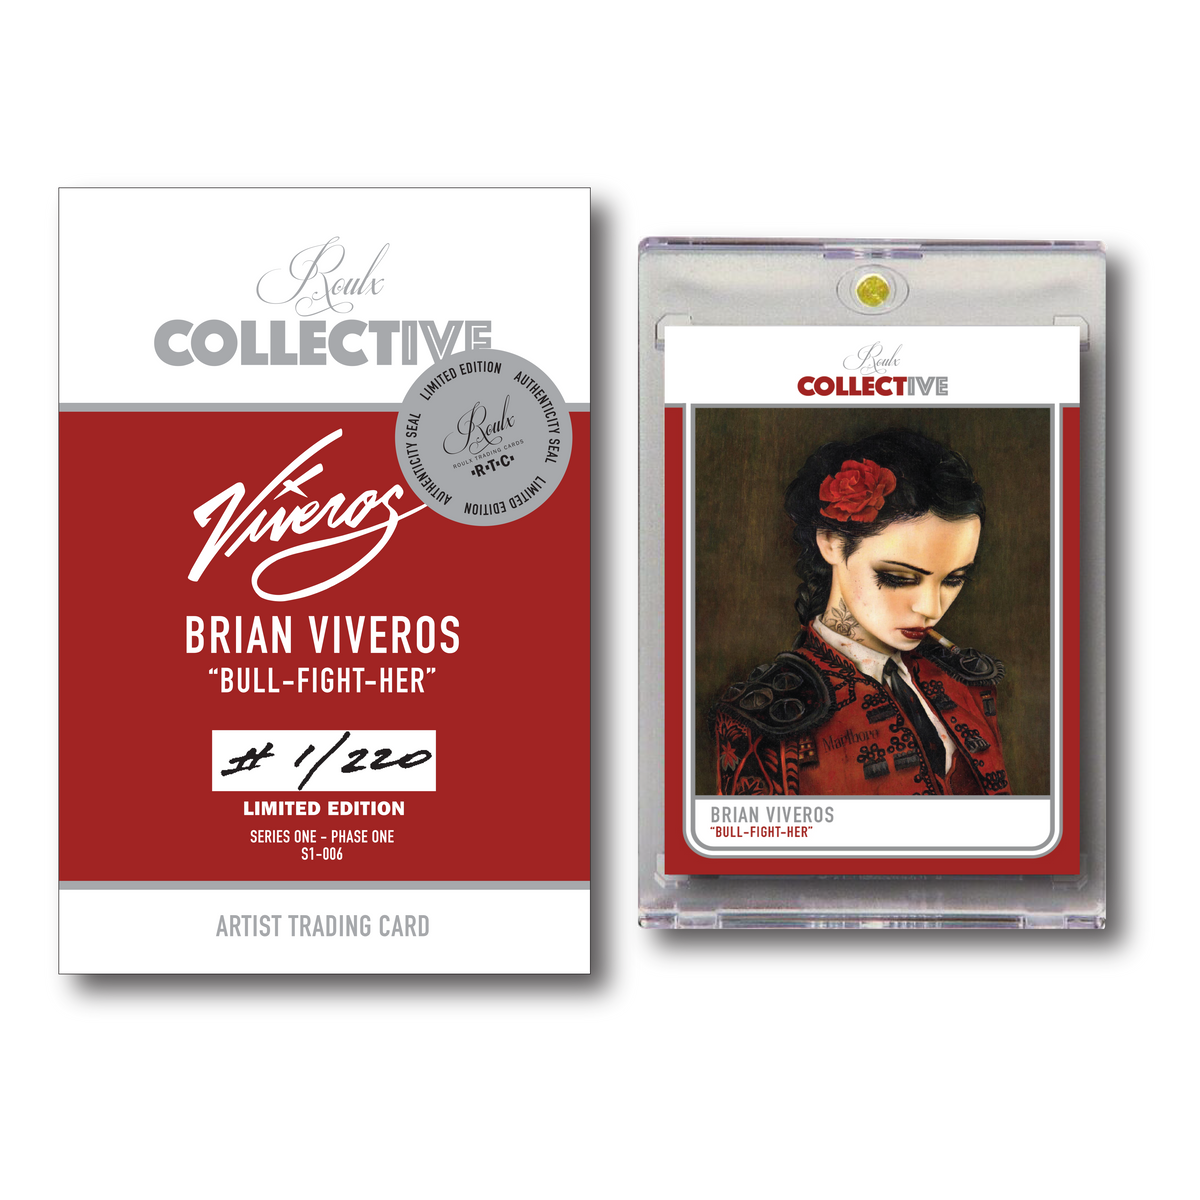 Brian Viveros &quot;Bull-Fight-Her&quot; S1-006 COLLECTIVE Trading Card